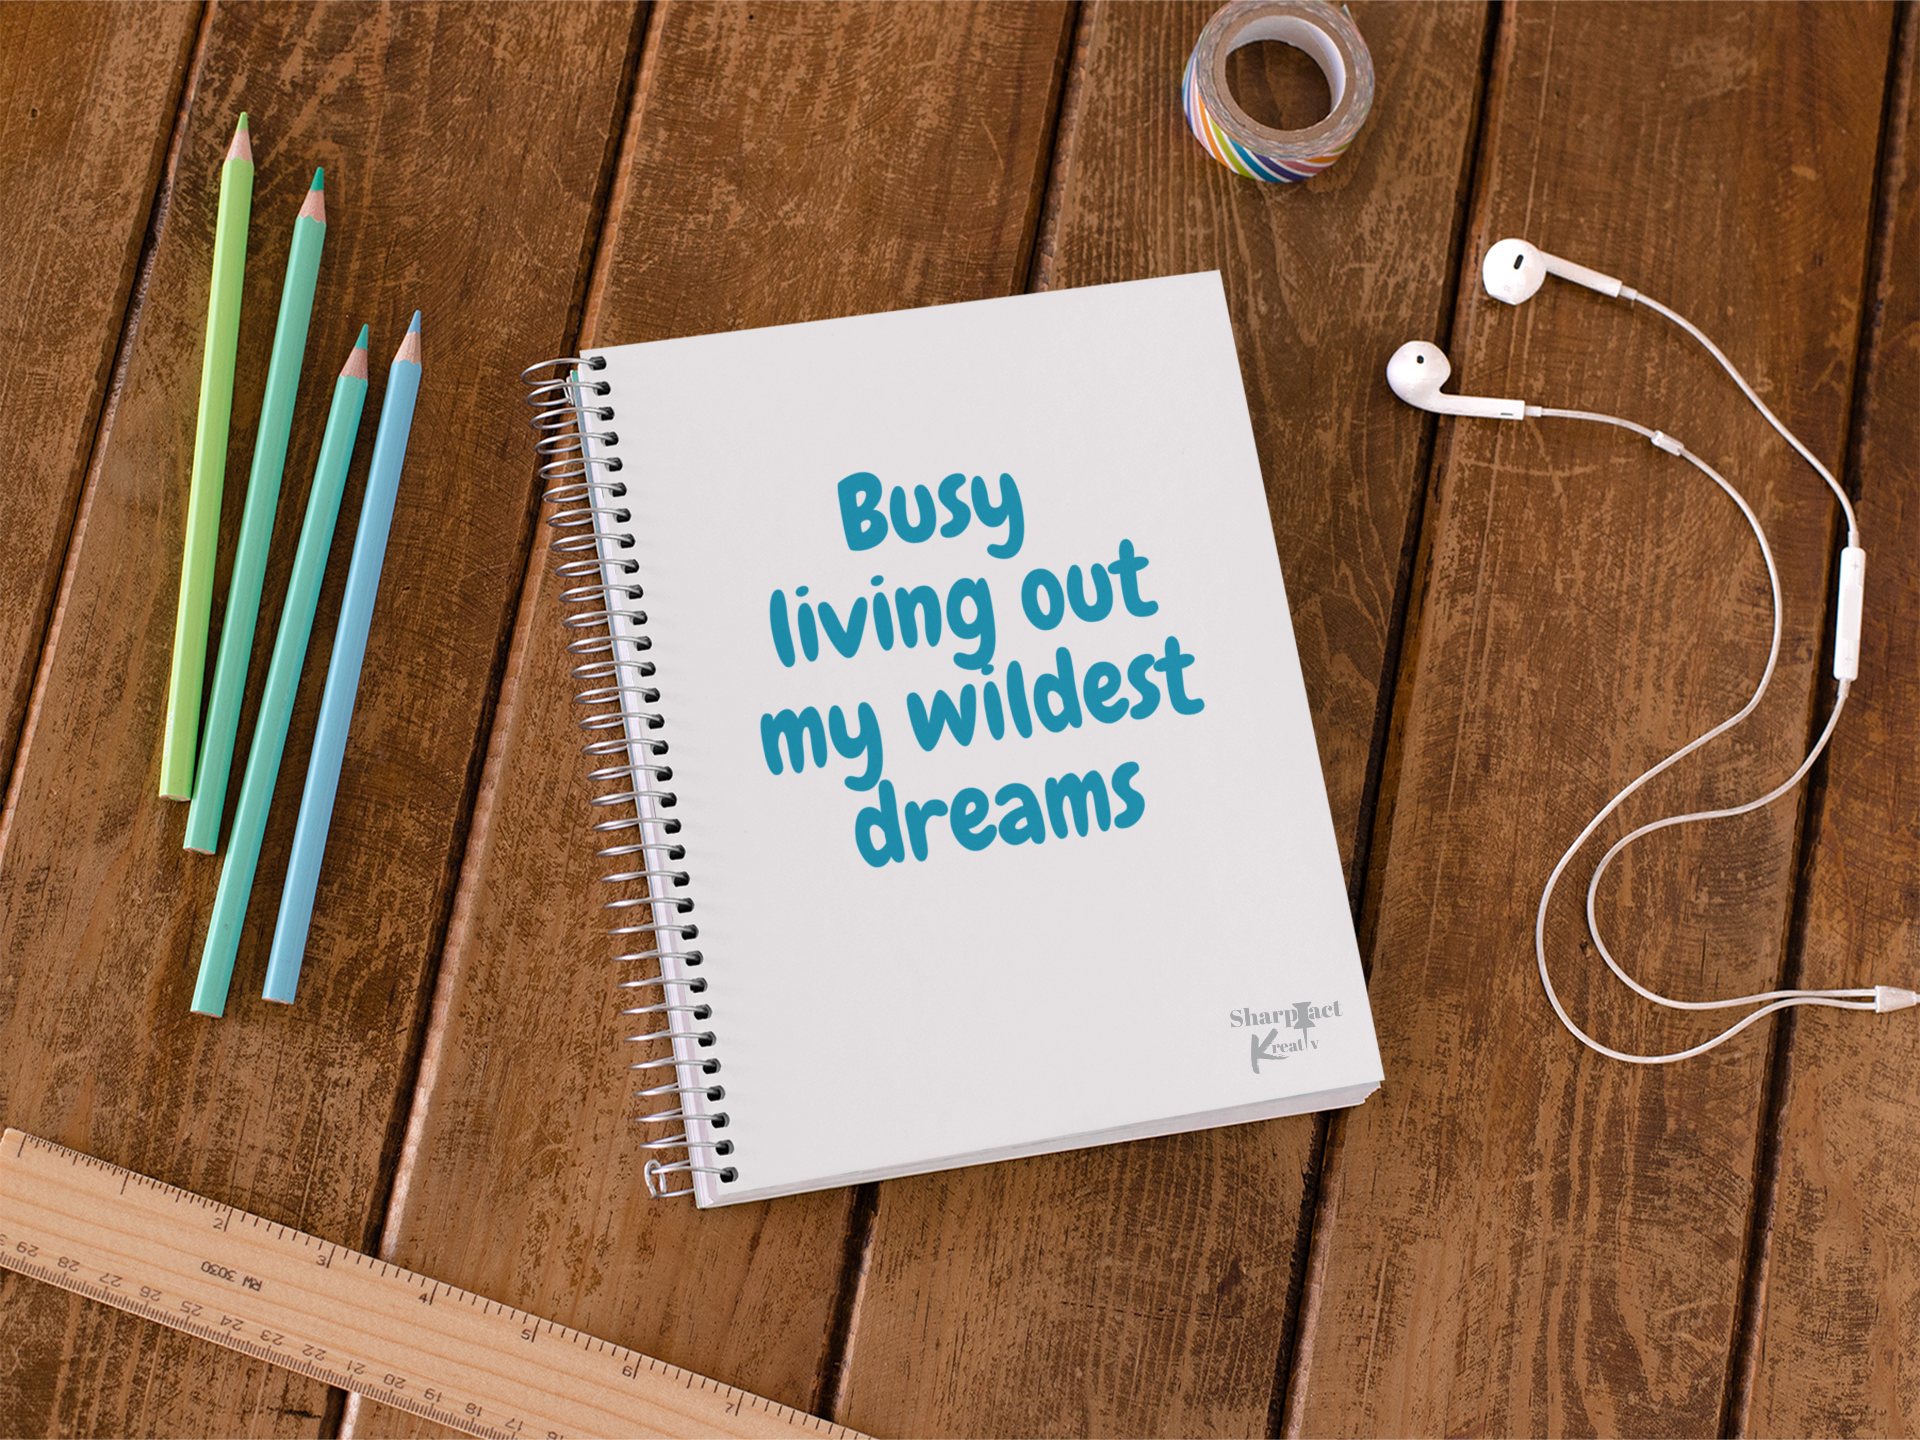 Sharp Tact Kreativ | Tees & Gifts with Encouraging Messages to Brighten Your Day with a Bit of Wit Busy Living Out My Wildest Dreams Notebook.